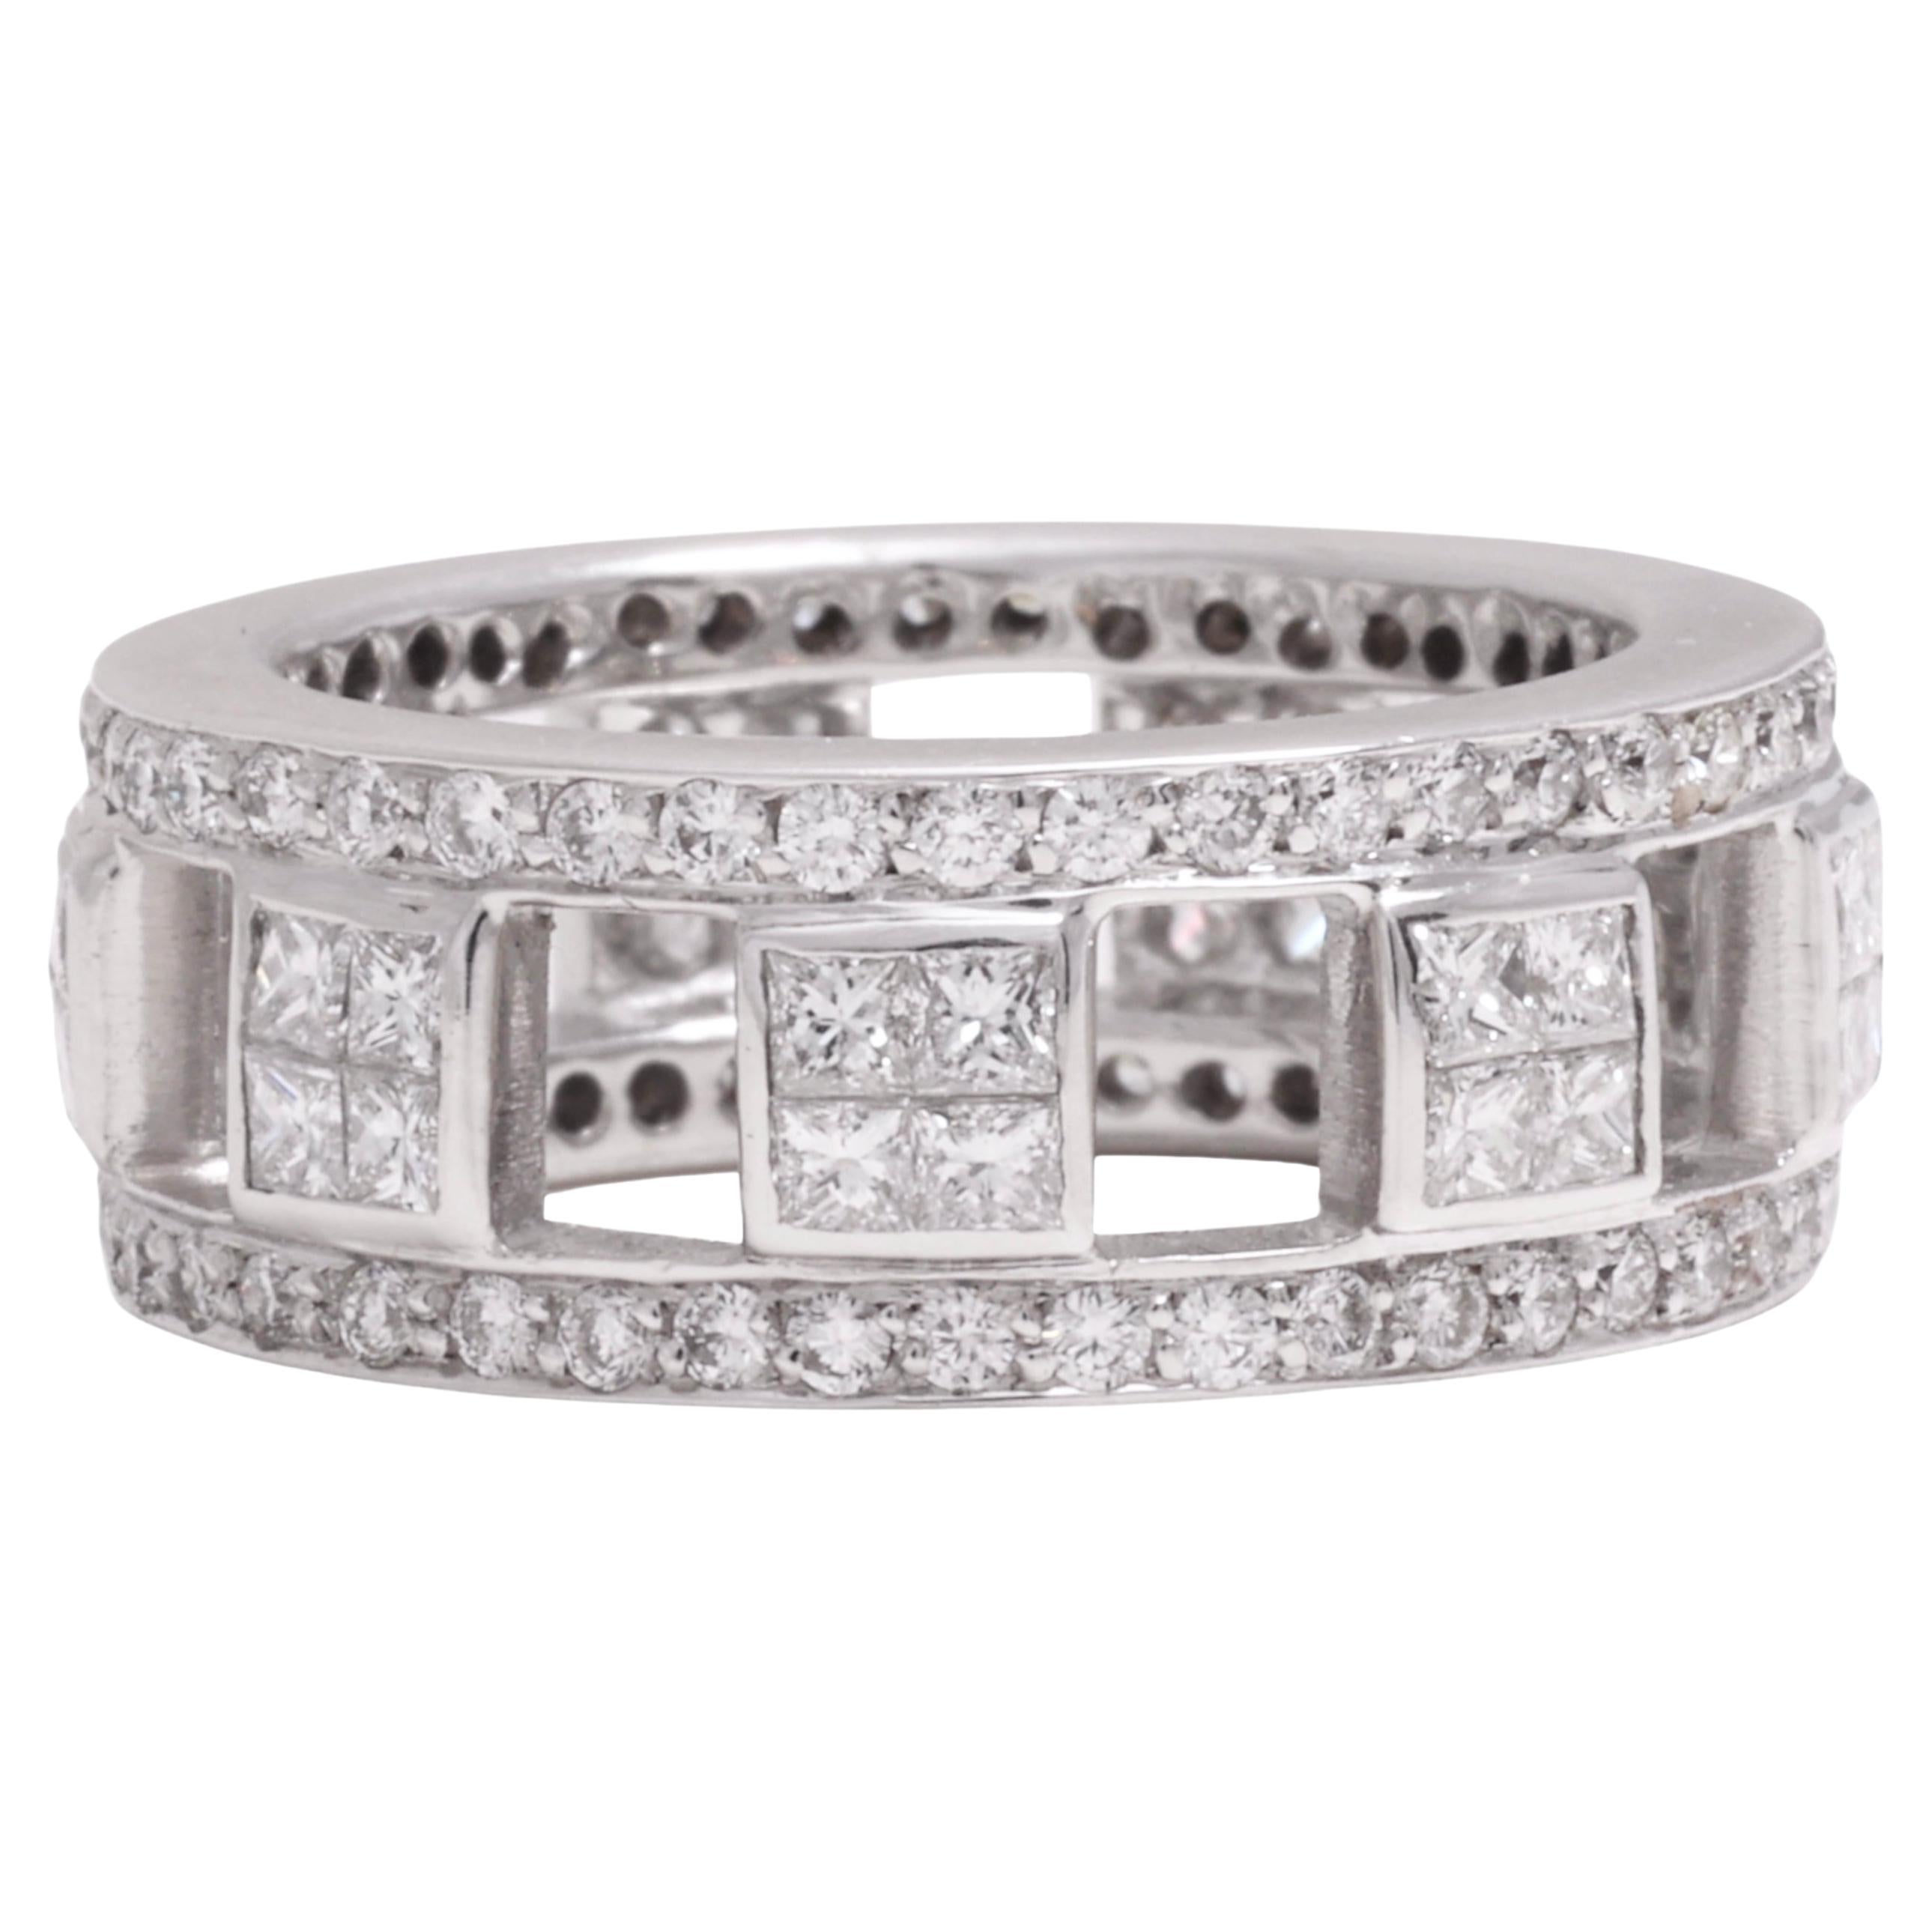 18 kt. White Gold Eternity Ring With 1.92 ct. Princess & Brilliant Cut Diamonds